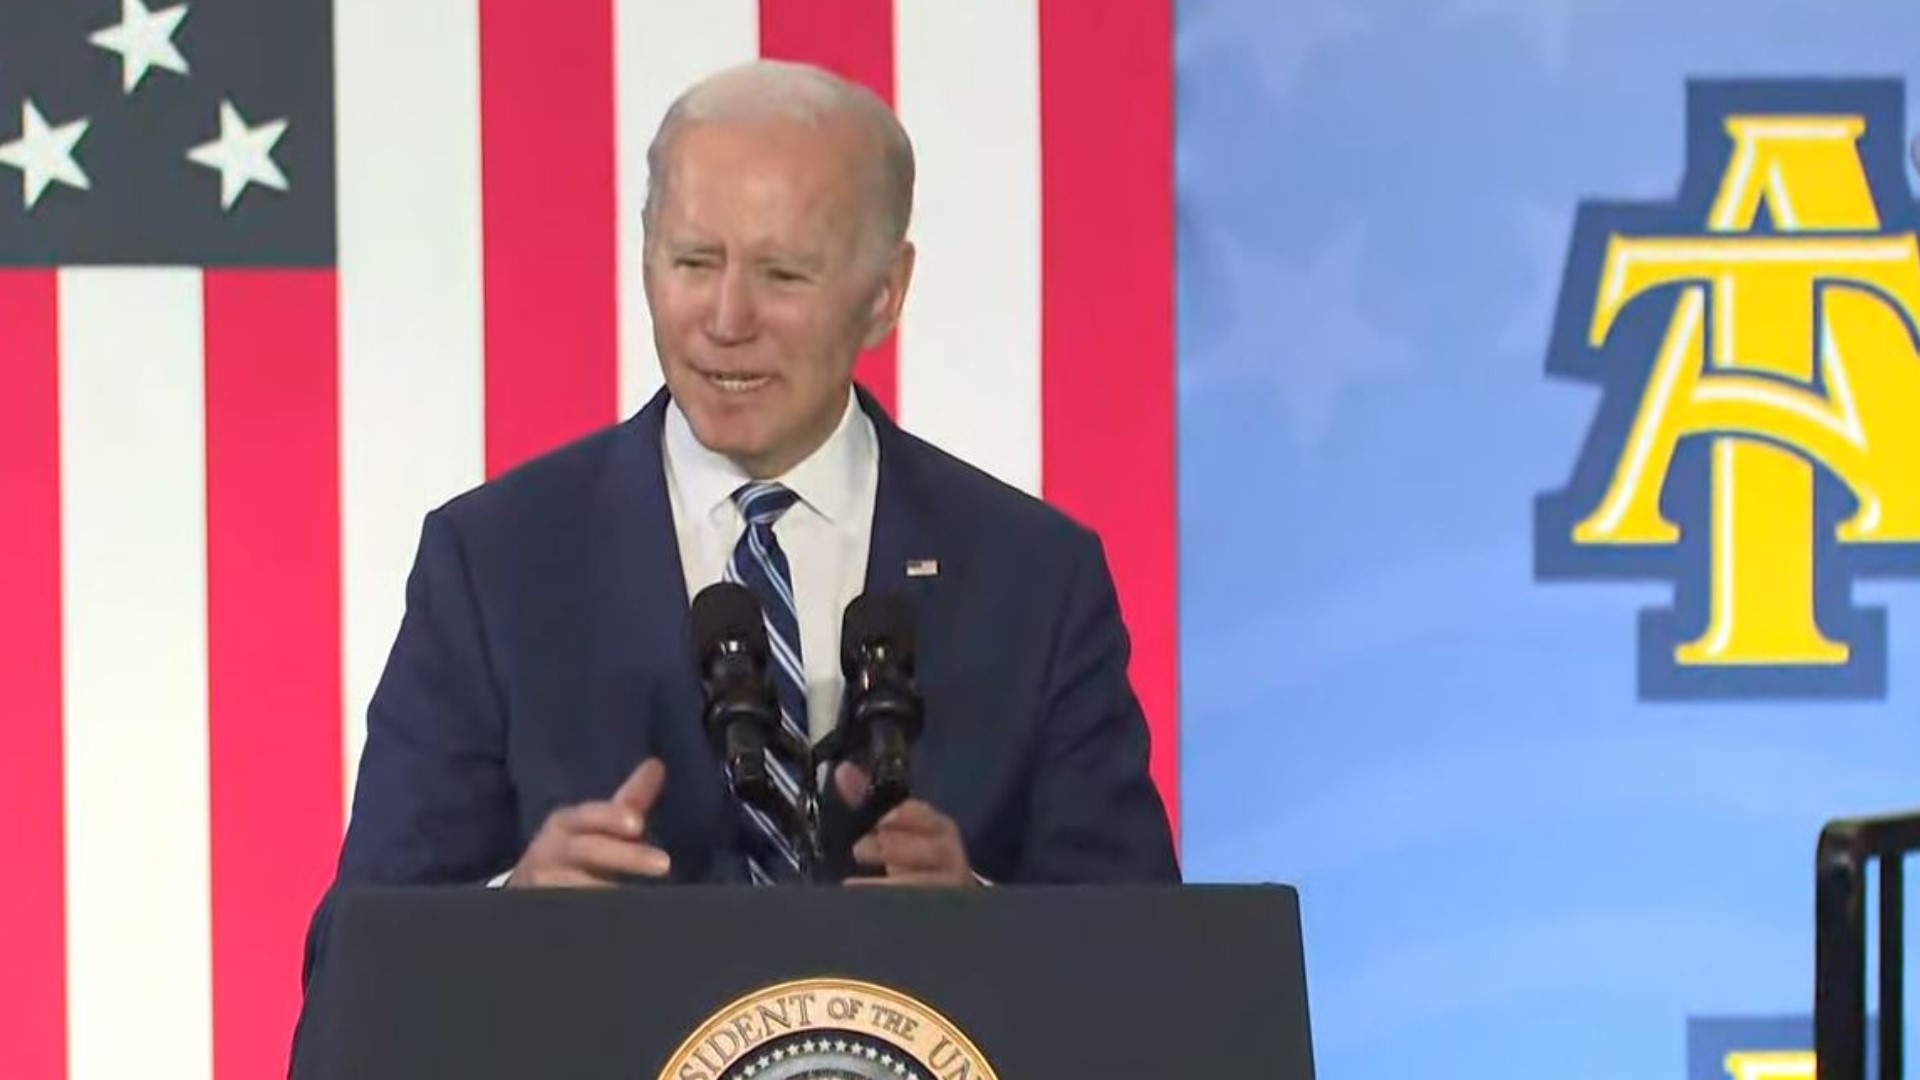 President Joe Biden visited North Carolina A&T Thursday. He lauded the historically black university on its efforts in preparing students for jobs in STEM, energy.